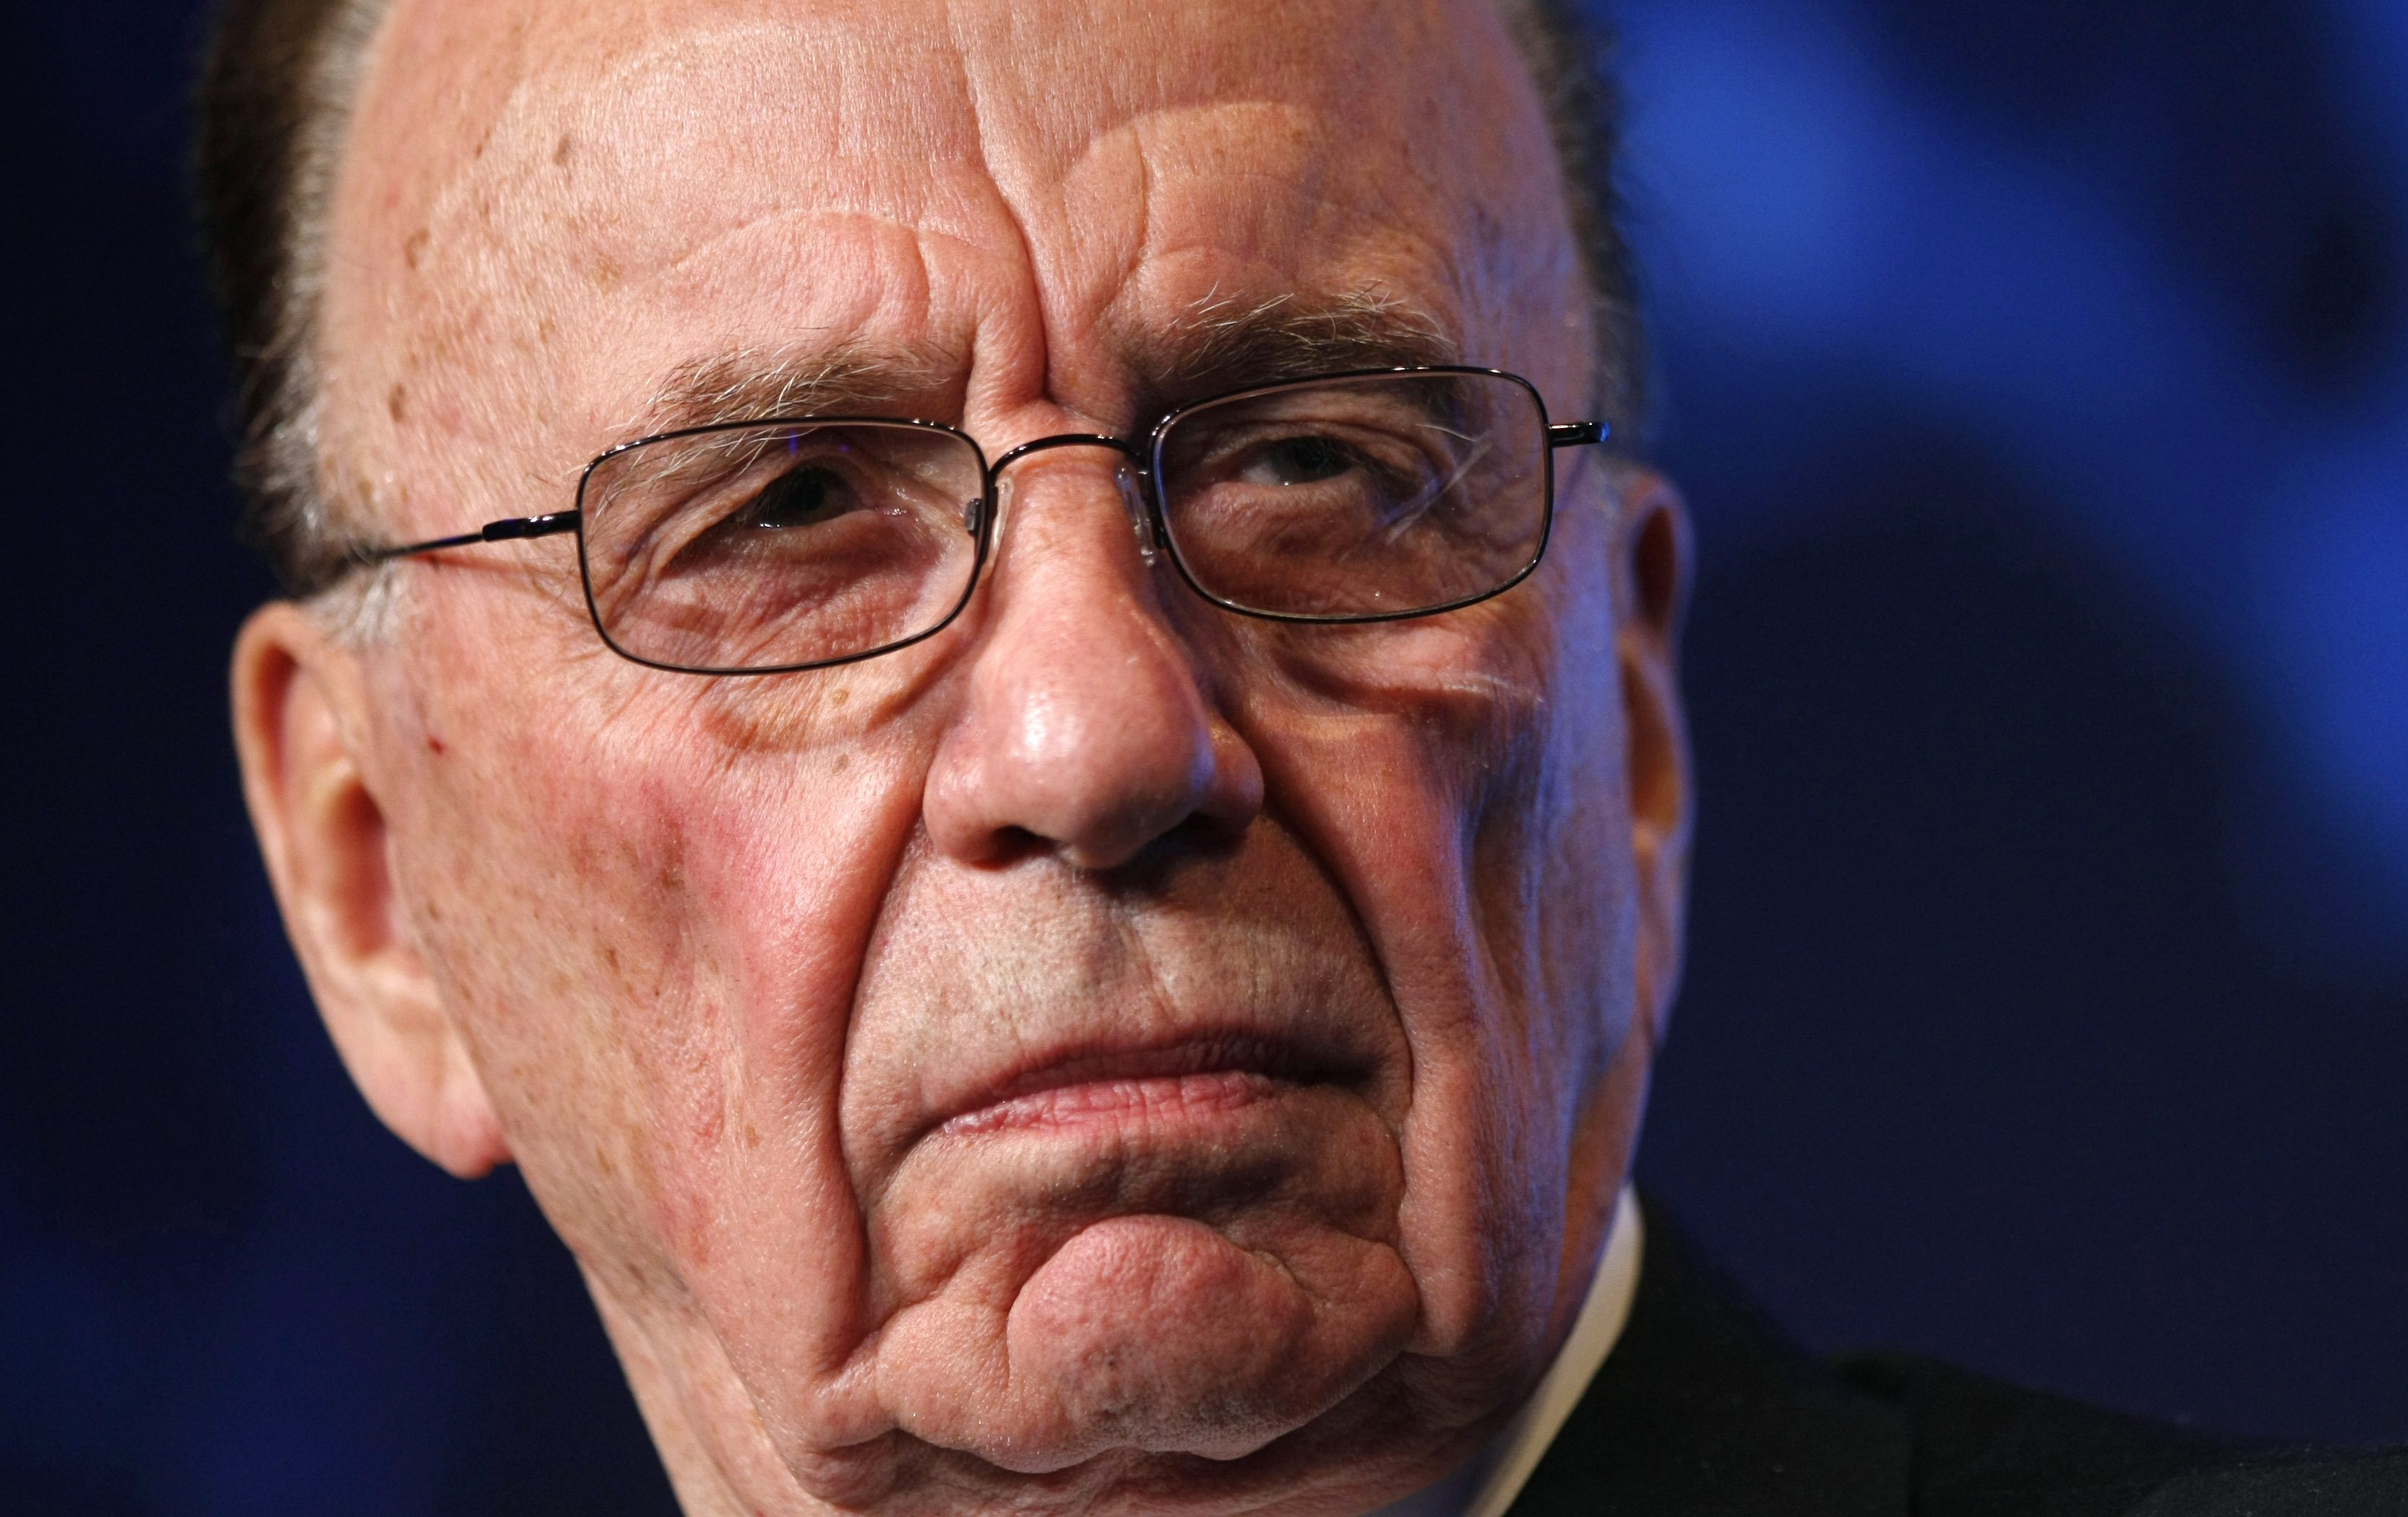 File photo of Rupert Murdoch listening to remarks at the Wall Street Journal CEO Council in Washington